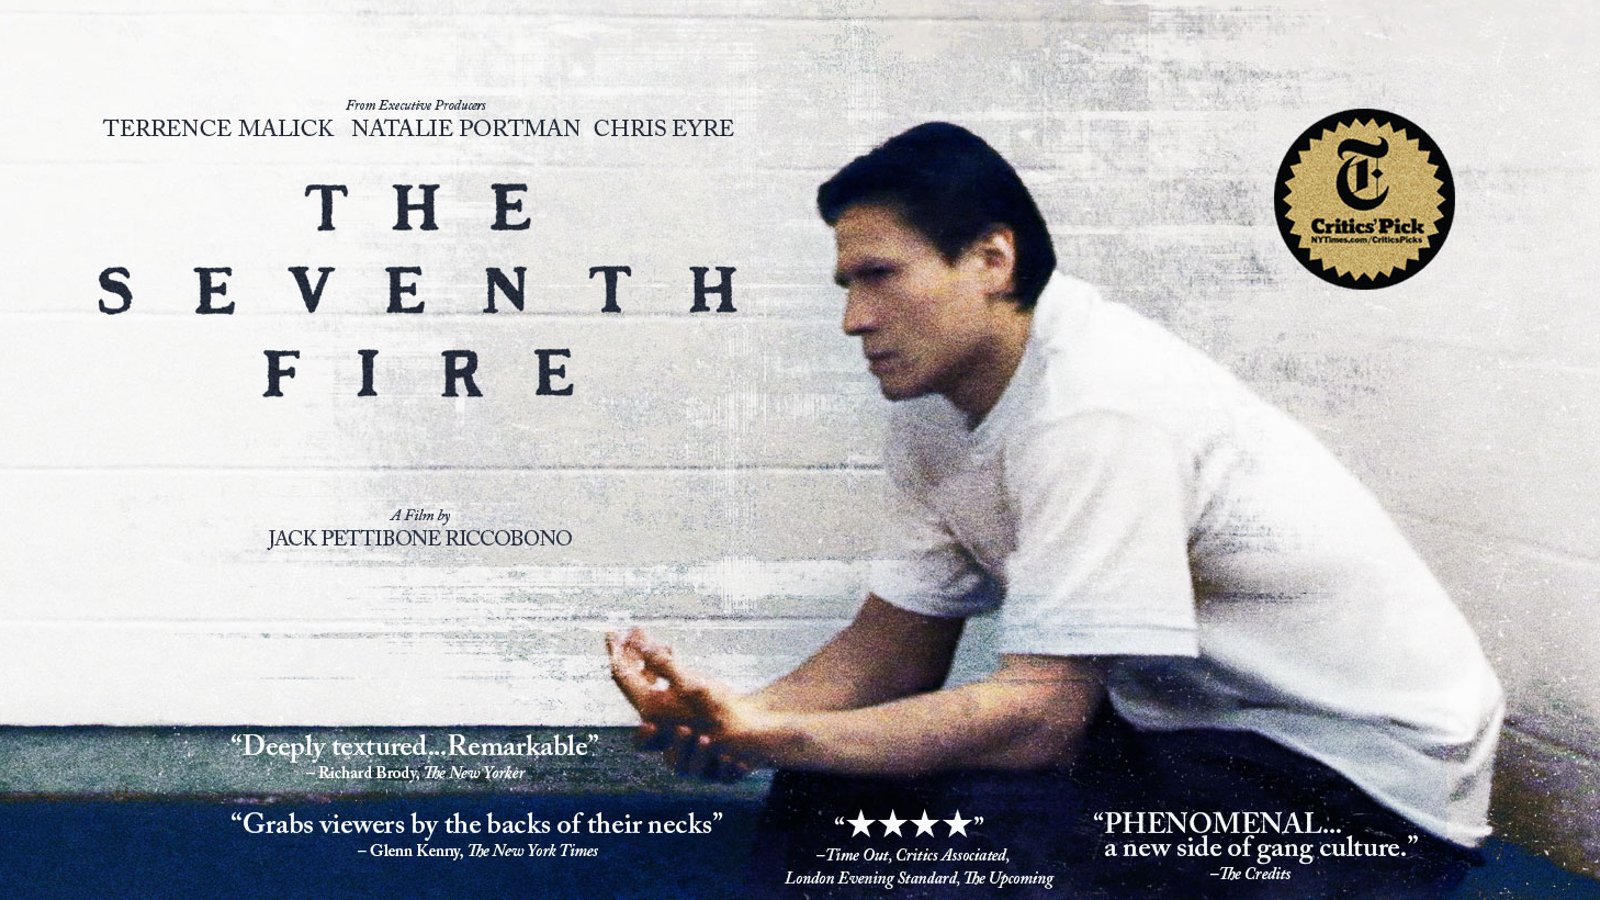 The Seventh Fire - A Native American Gang Leader Confronts His Violent Past